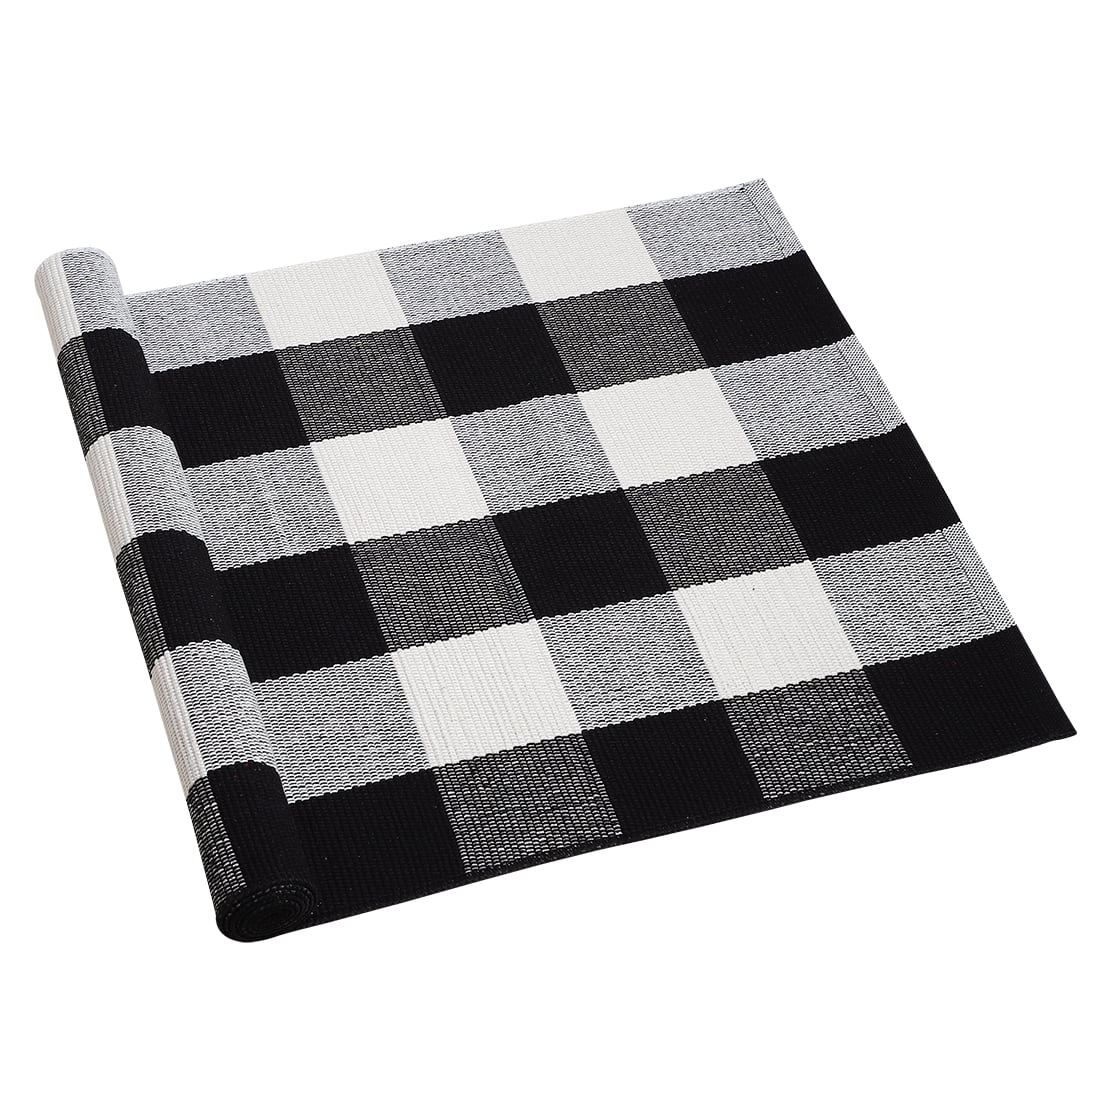 Buffalo Plaid Check Checkered Rug Cotton Hand-Woven Rugs for Welcome Doormat 51" 